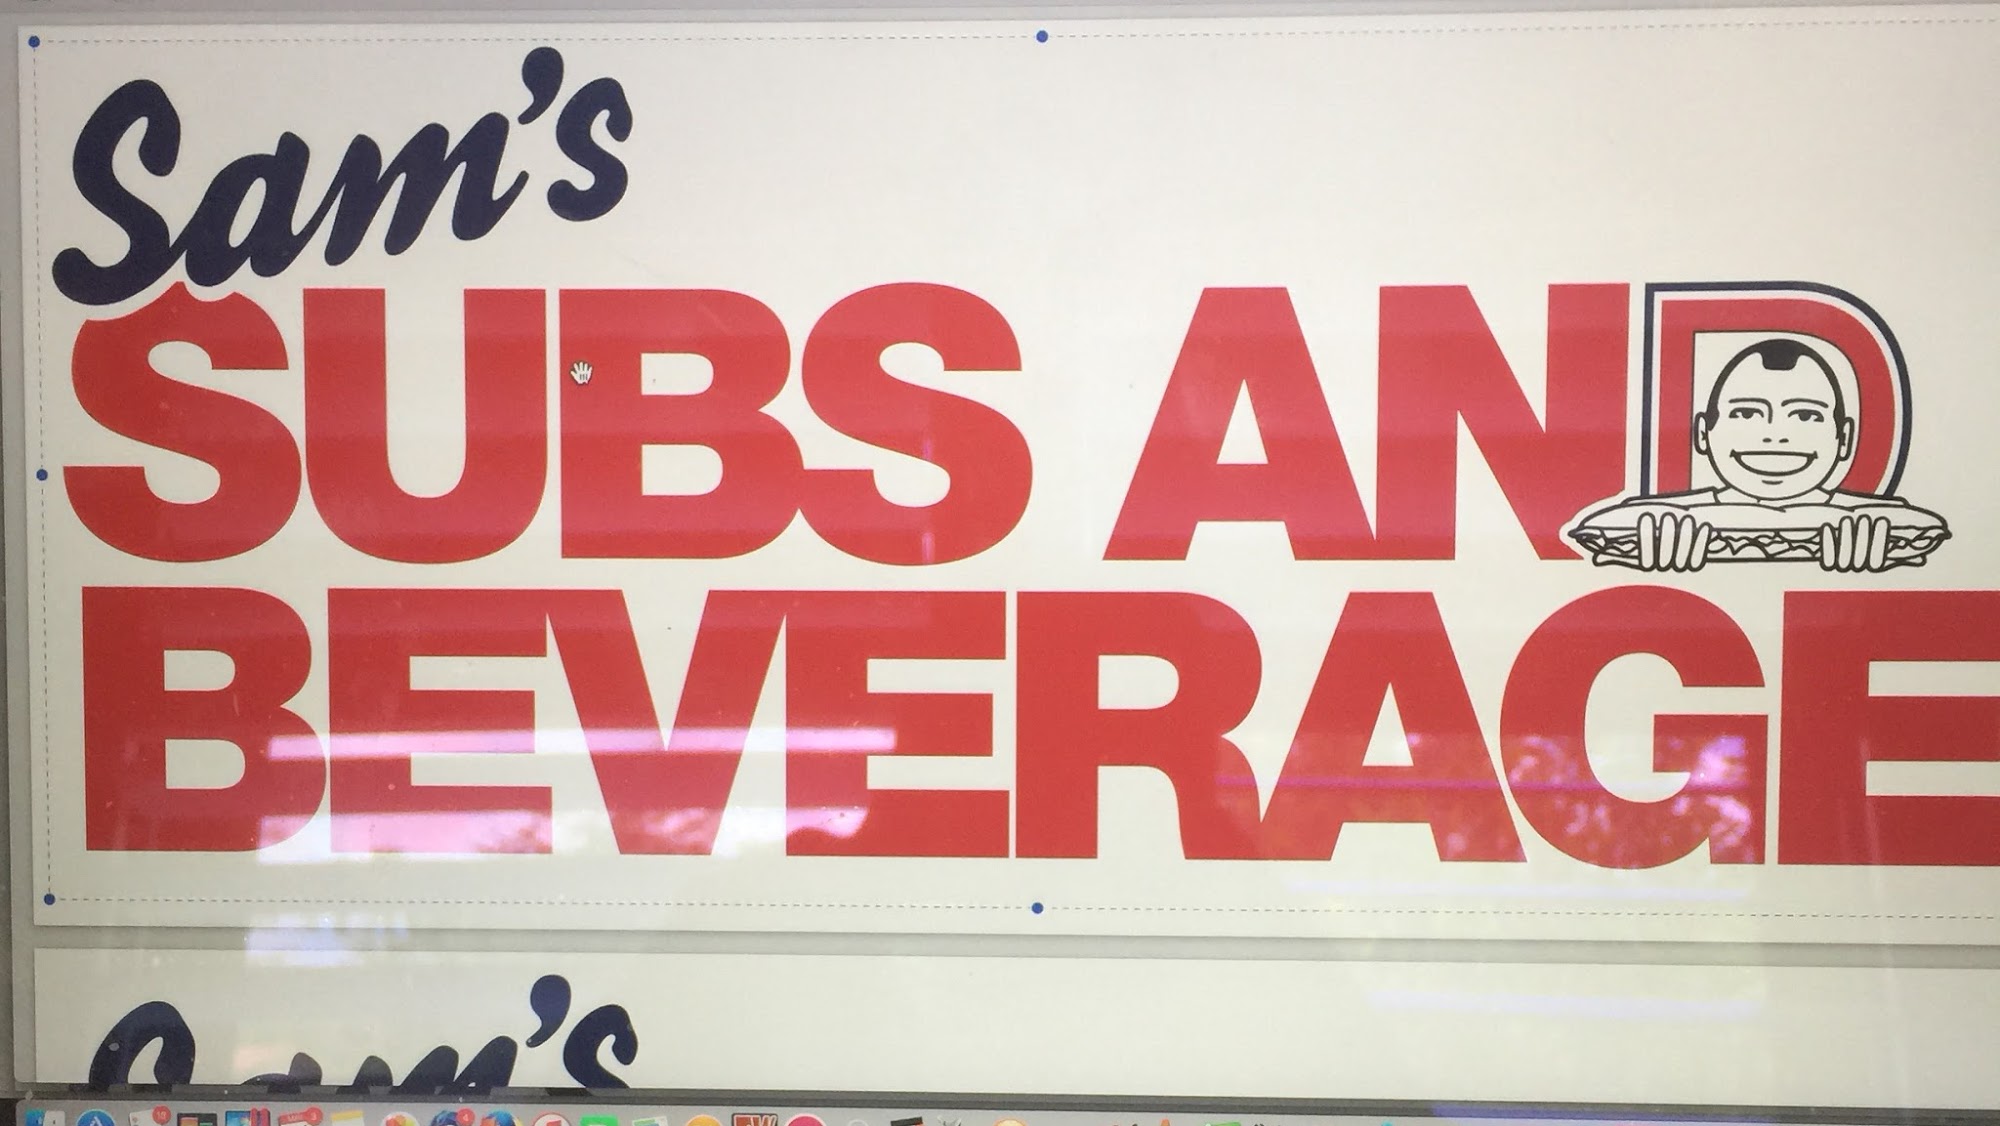 Sam's Subs and Beverage